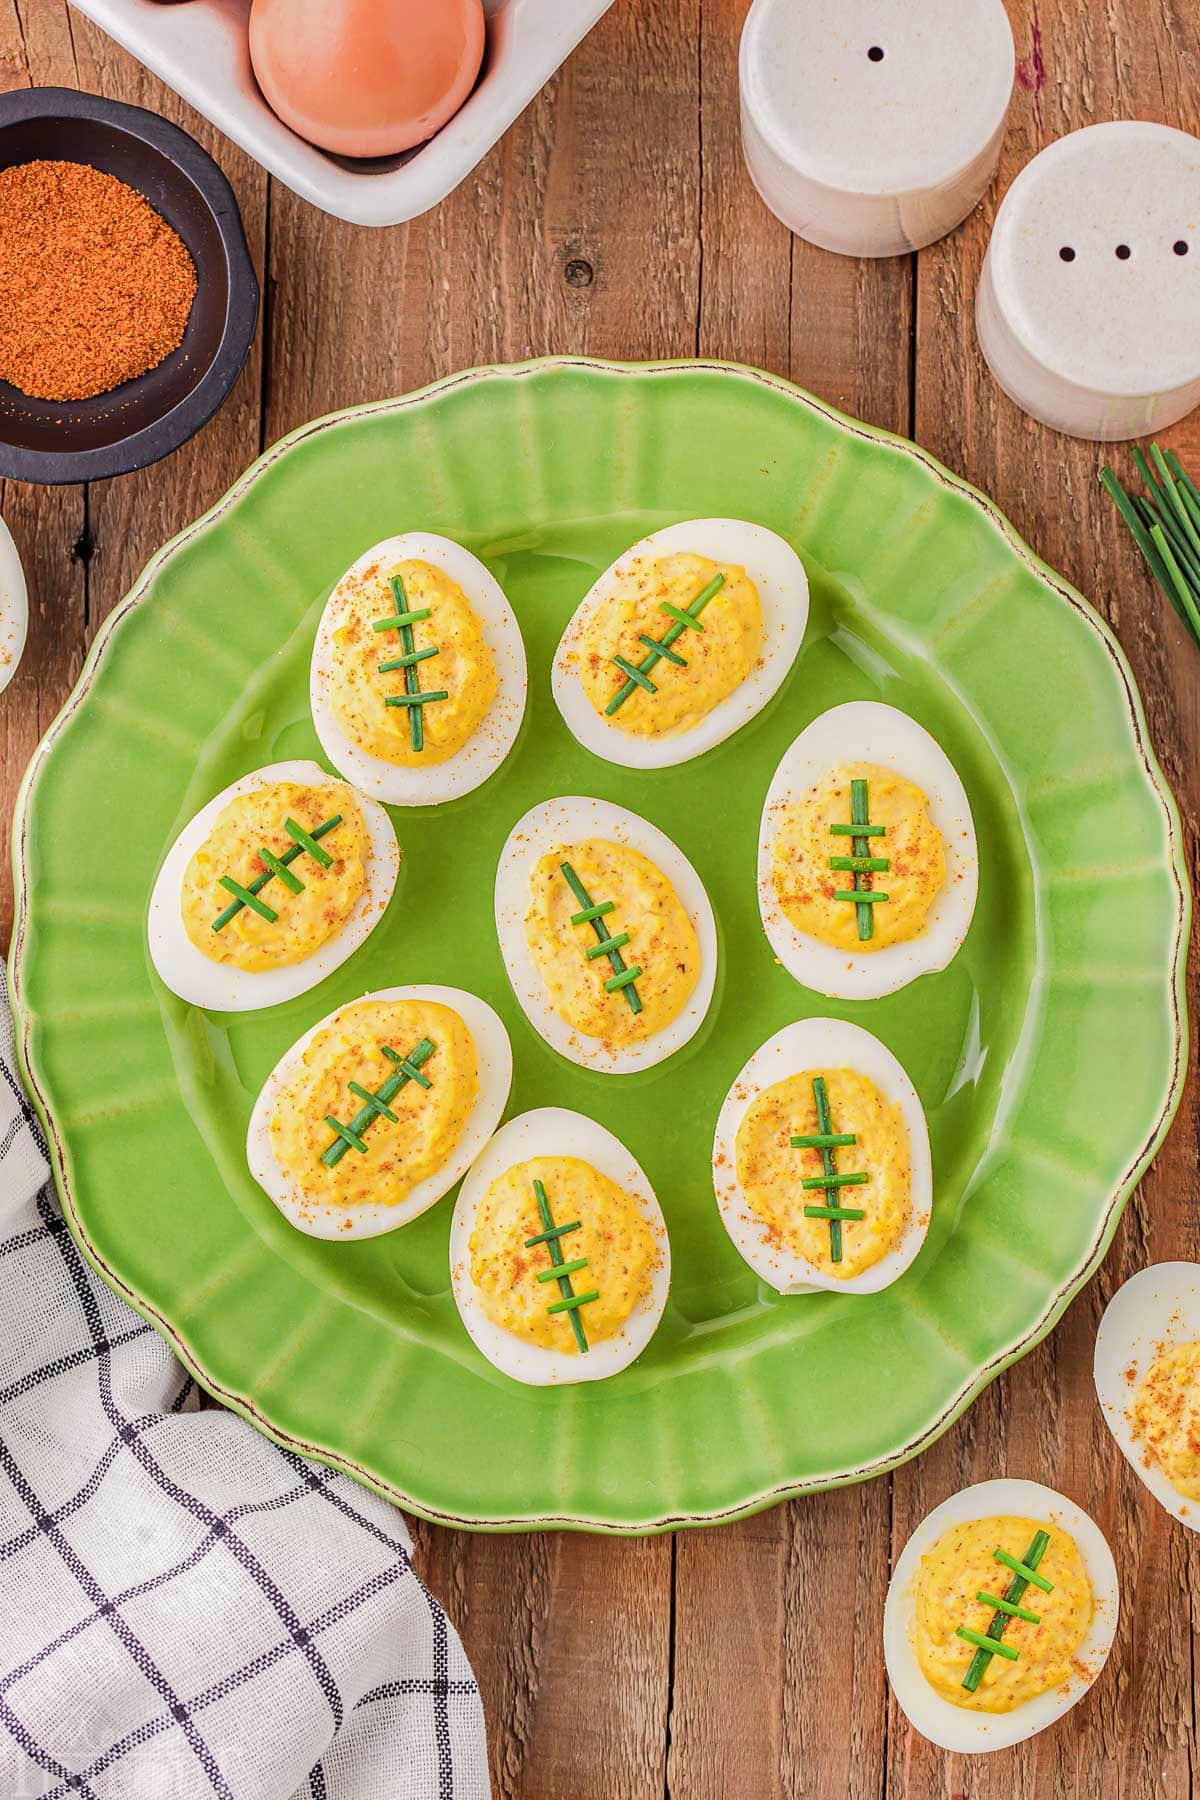 top down look at green plated loaded with deviled eggs that look like footballs.